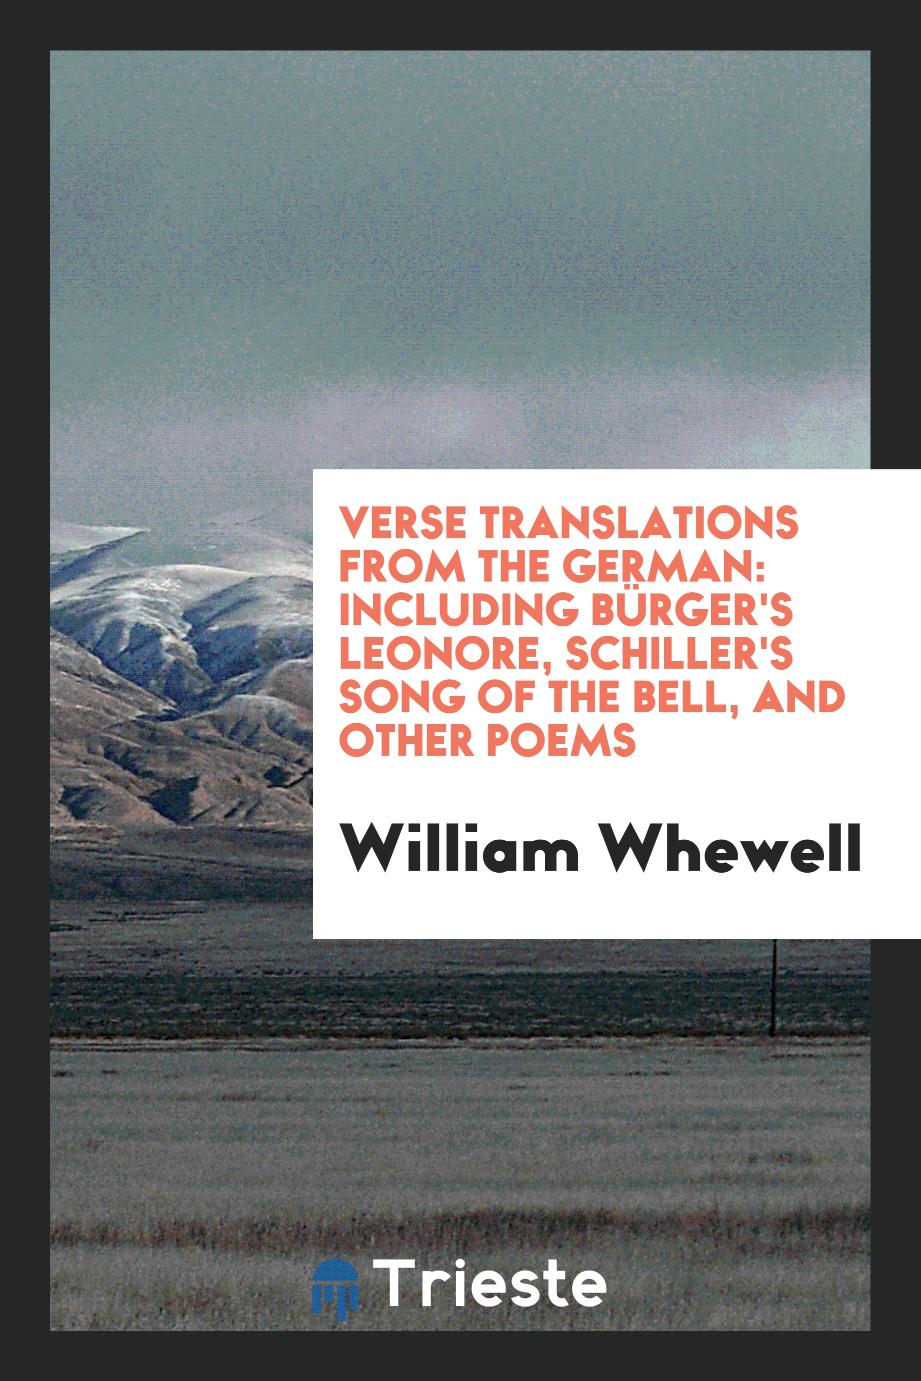 Verse Translations from the German: Including Bürger's Leonore, Schiller's Song of the Bell, and Other Poems